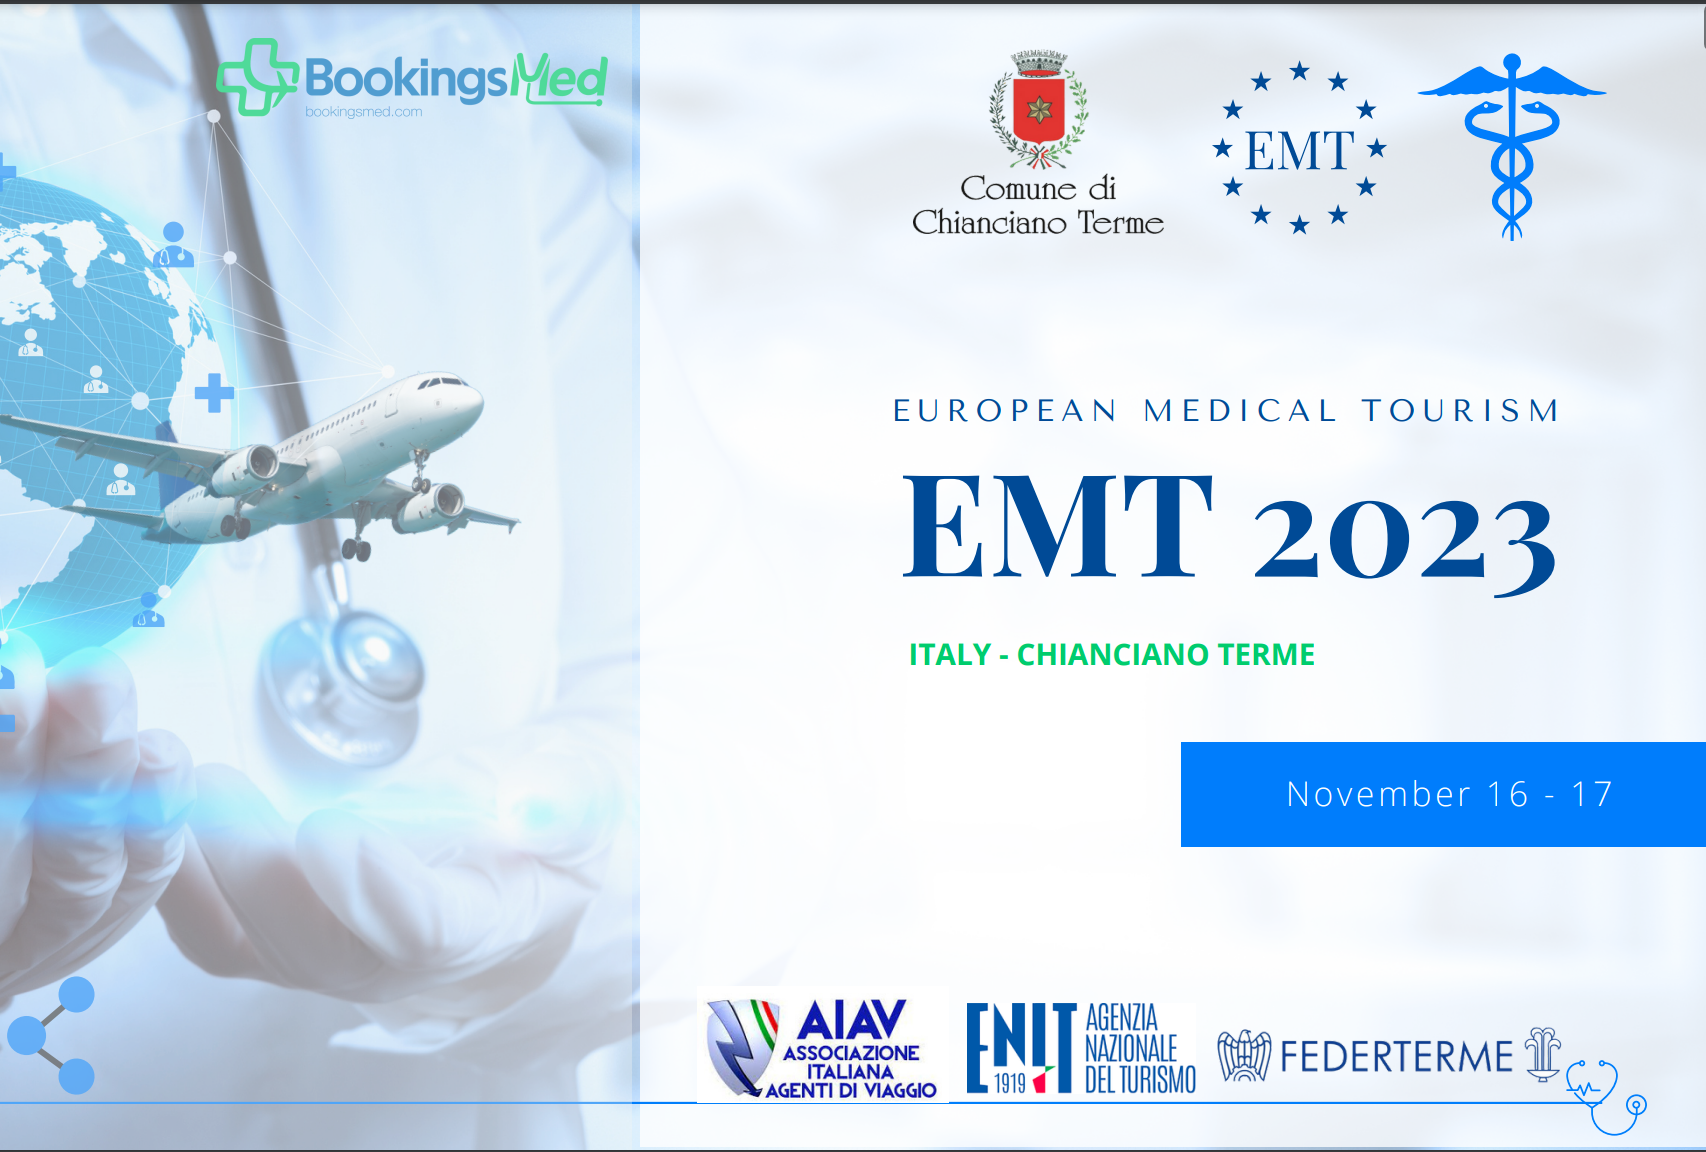 7th Edition of European Medical Tourism Exhibition & Conference (EMT 2023) will be held in Italy